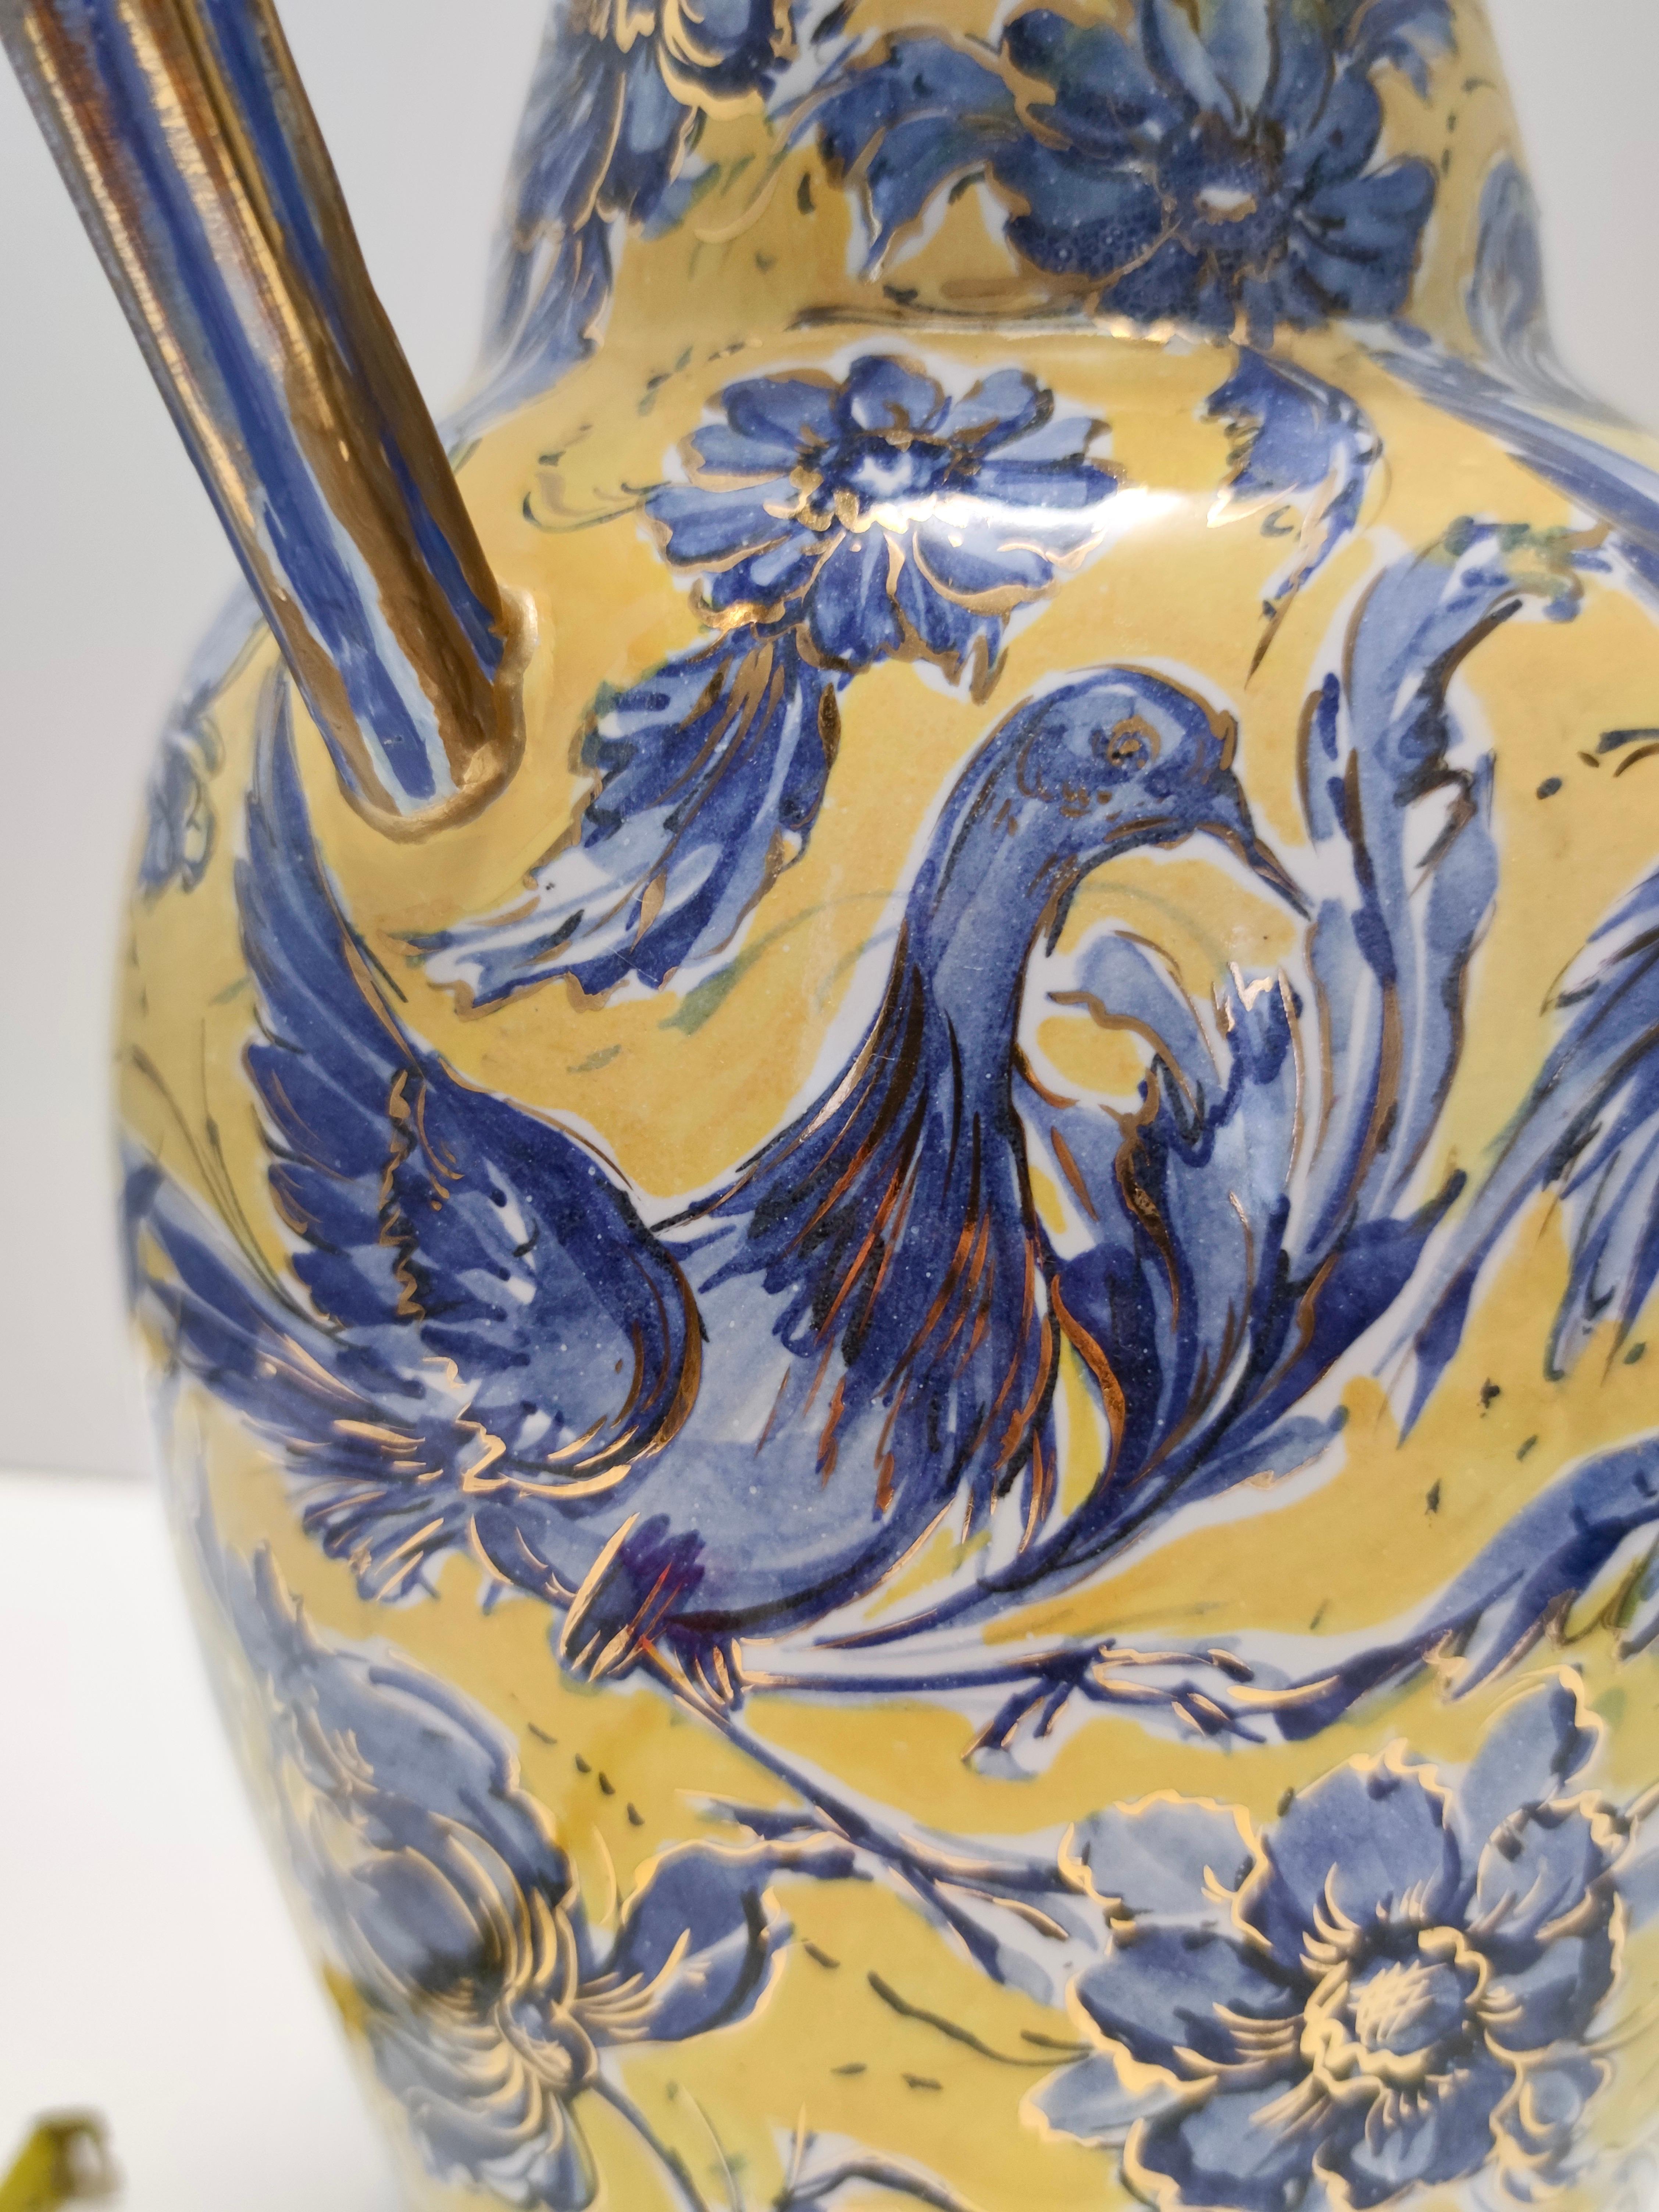 Handmade Yellow and Blue Glazed Ceramic Amphora Vase by Zulimo Aretini, Italy For Sale 5